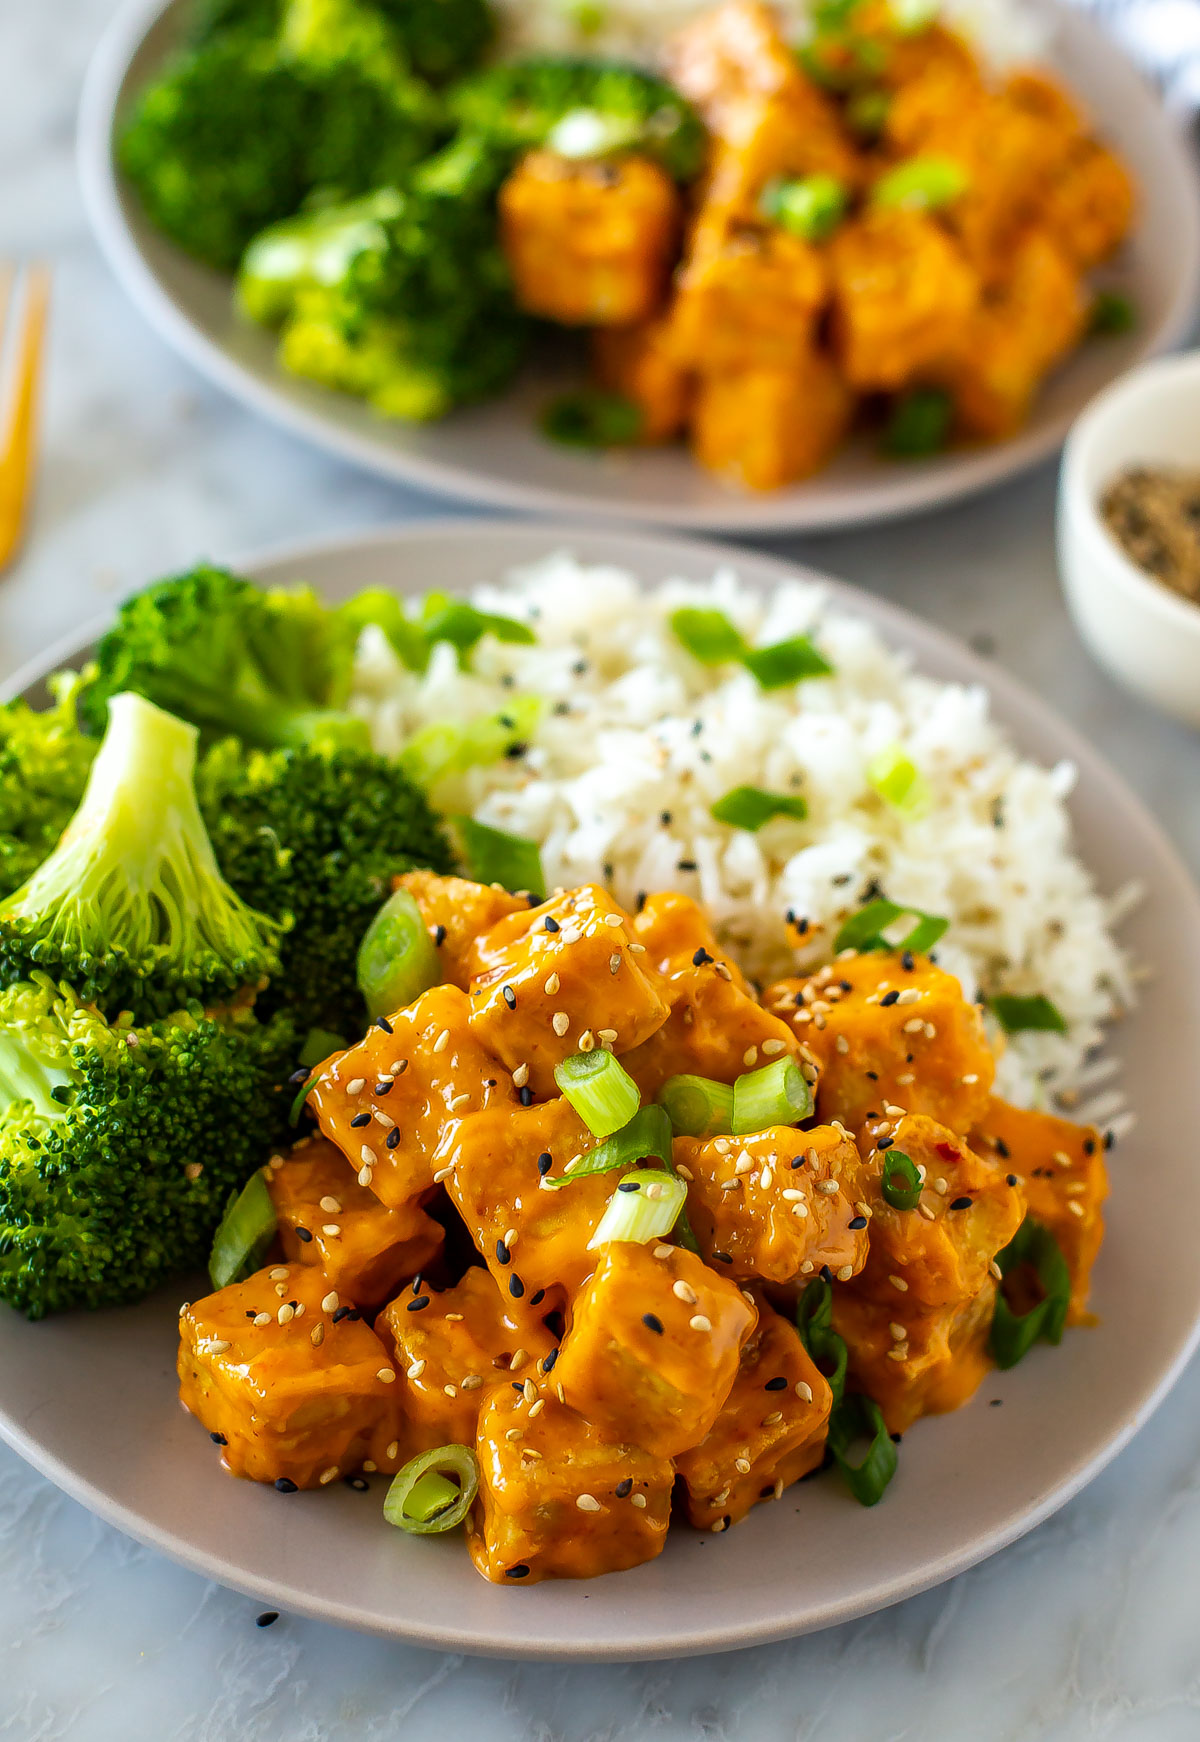 A close-up of a plate of air fryer tofu with rice and broccoli on the side.